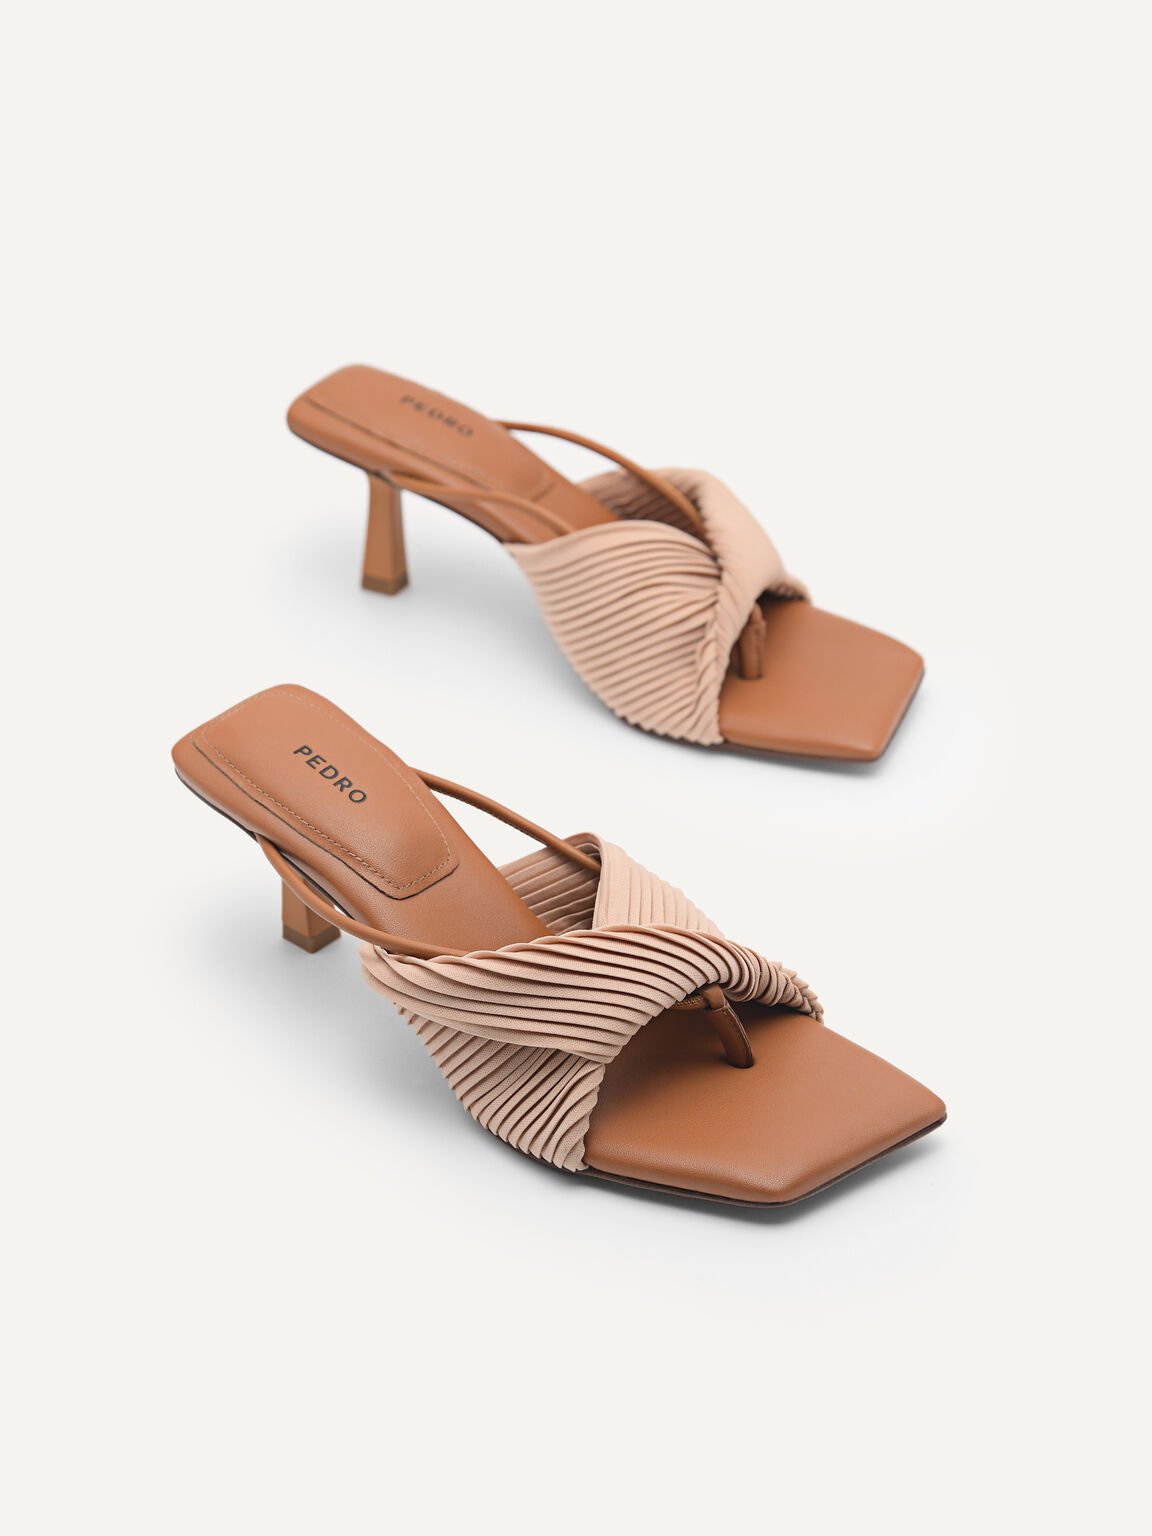 rePEDRO Pleated Heeled Sandals, Nude, hi-res